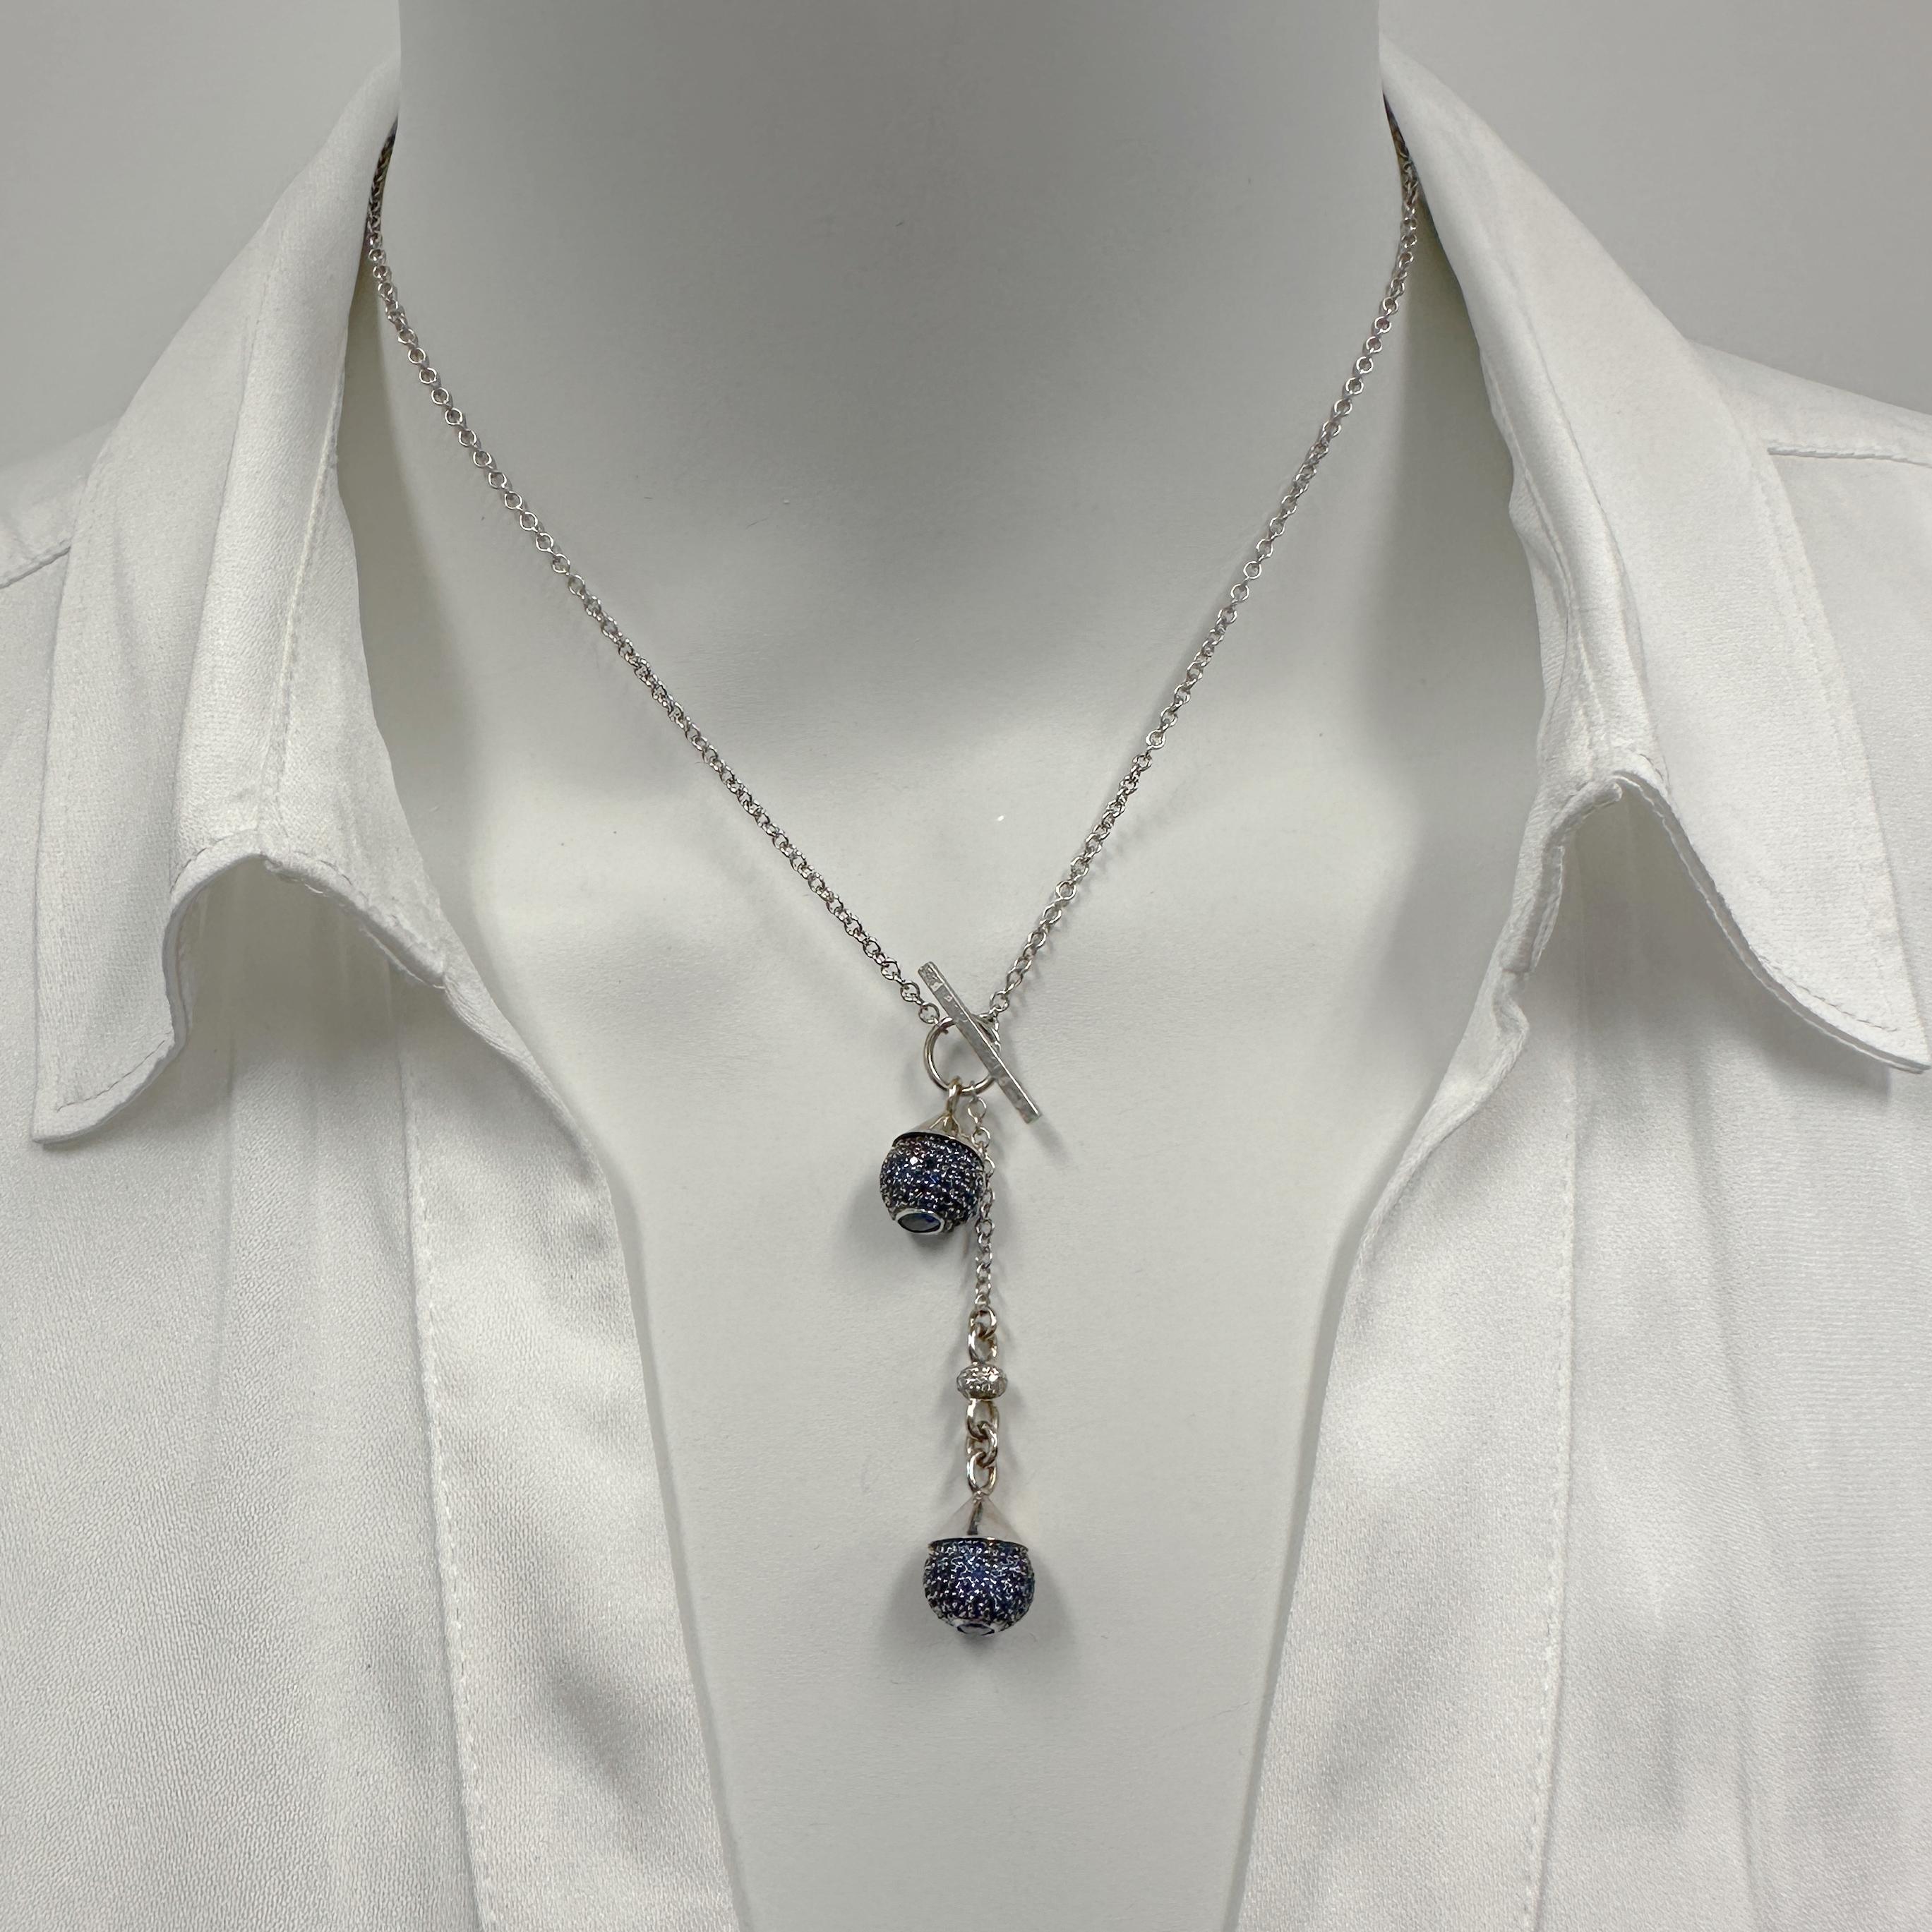 Eytan Brandes tore apart a dressy sapphire cuff link (see final photo in array) to make this incredible, one-of-a-kind* toggle necklace.  

The sapphire balls are an incredible feat of stone-setting; it's not easy to pave-set stones on a sphere! 